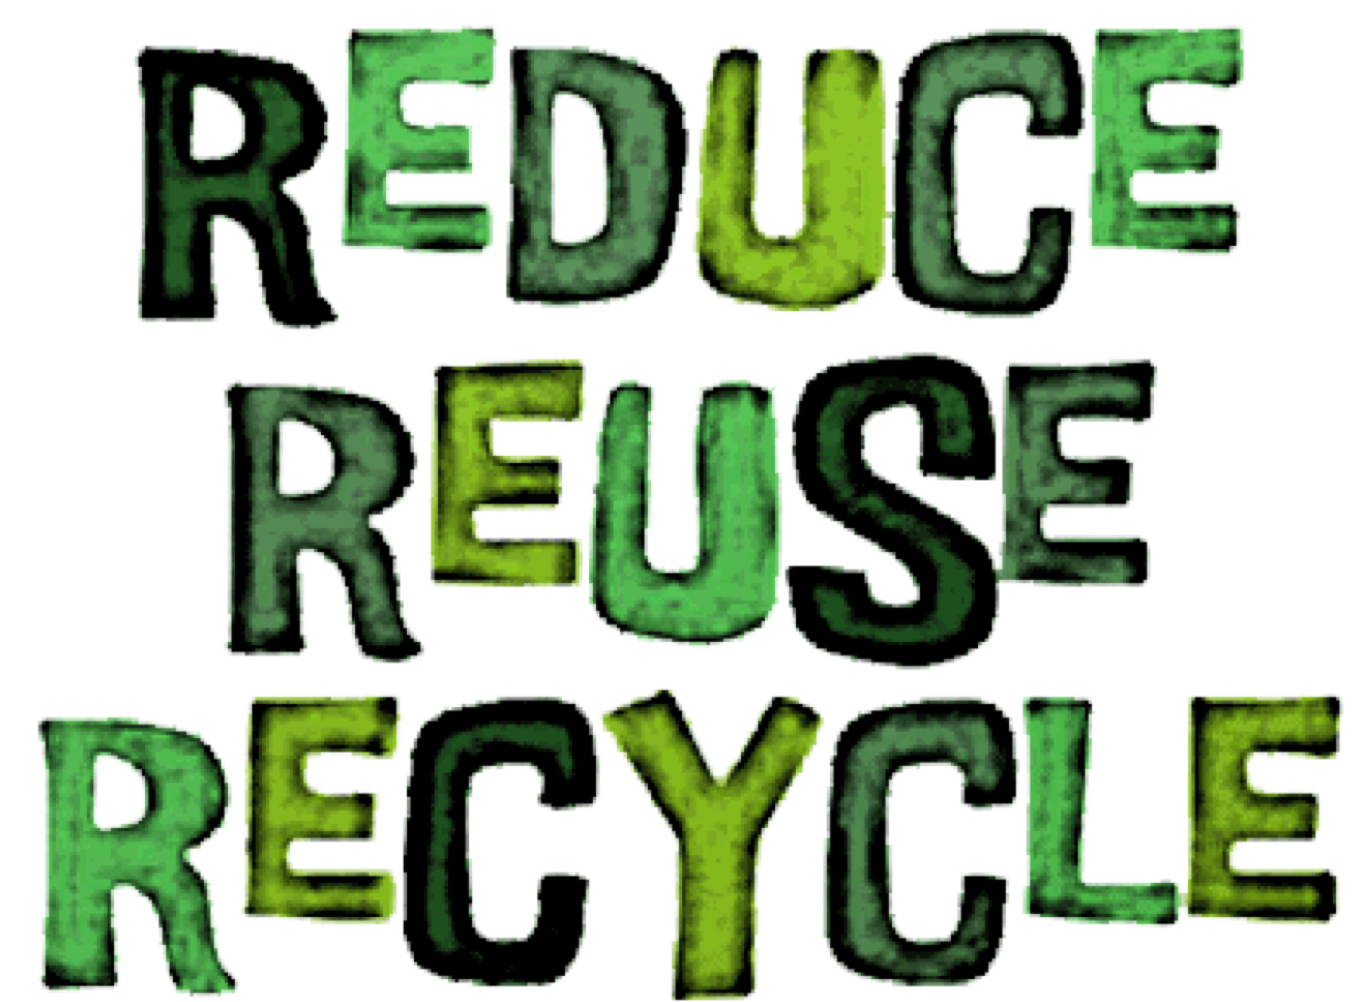 Reduce mean. Reduce рисунок. 3r reduce reuse recycle. Eco Team. Eco friendly.